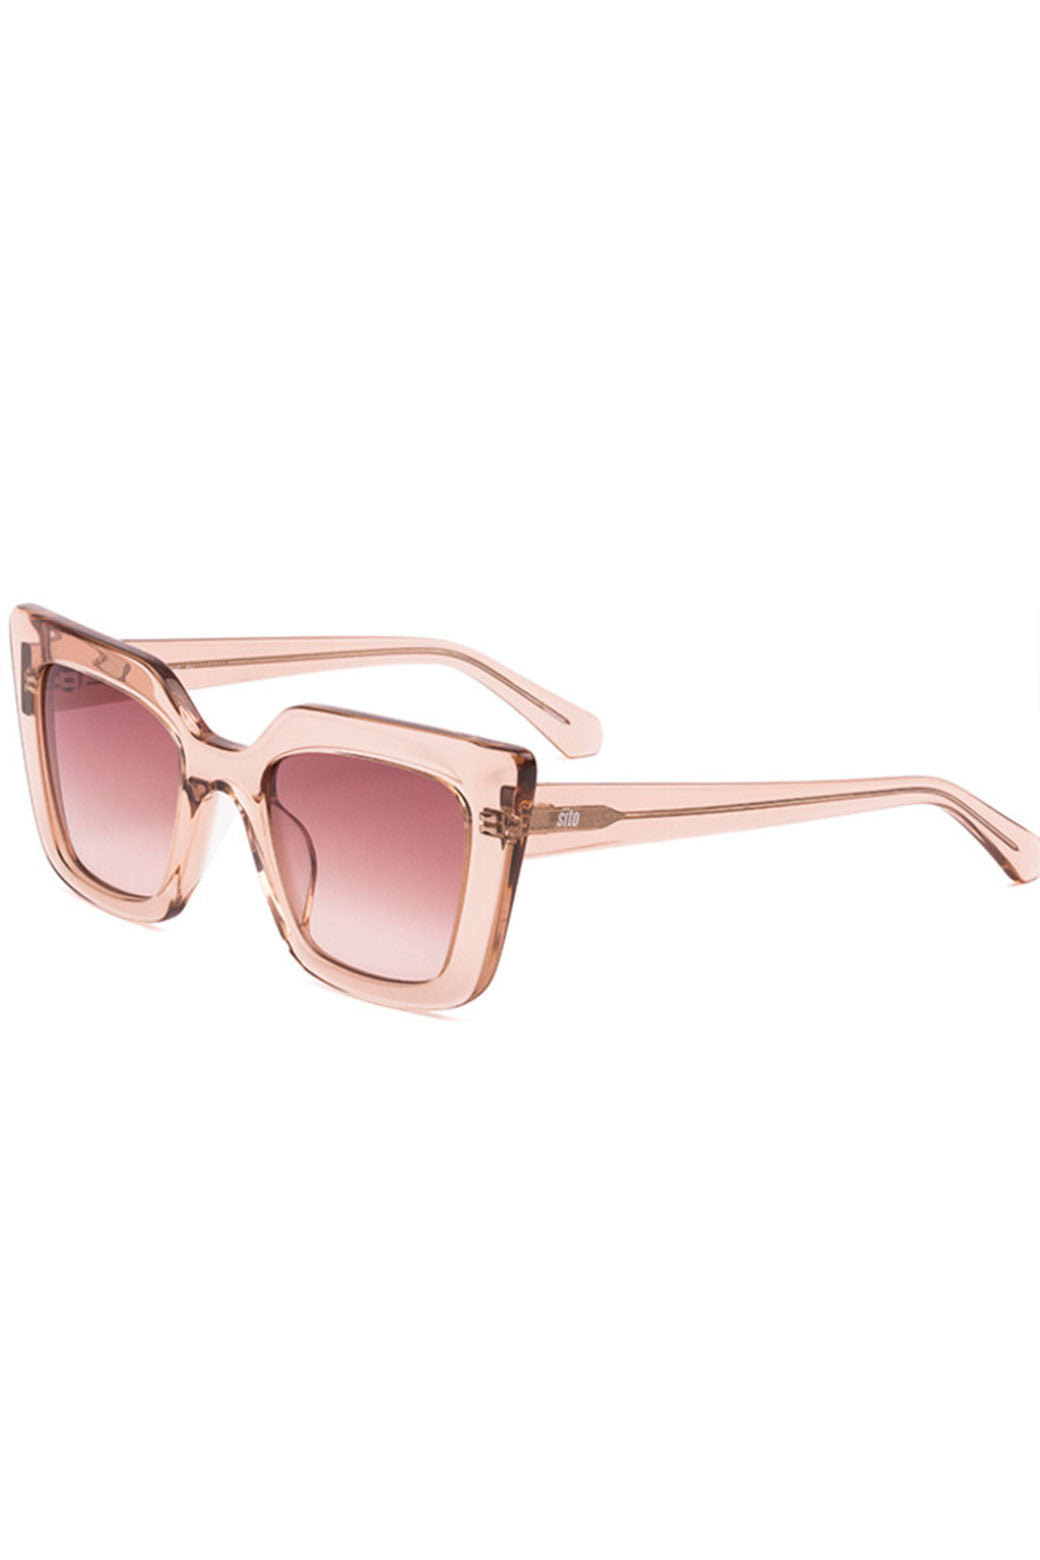 Sito Cult Vision Sirocco/Rose Gradient